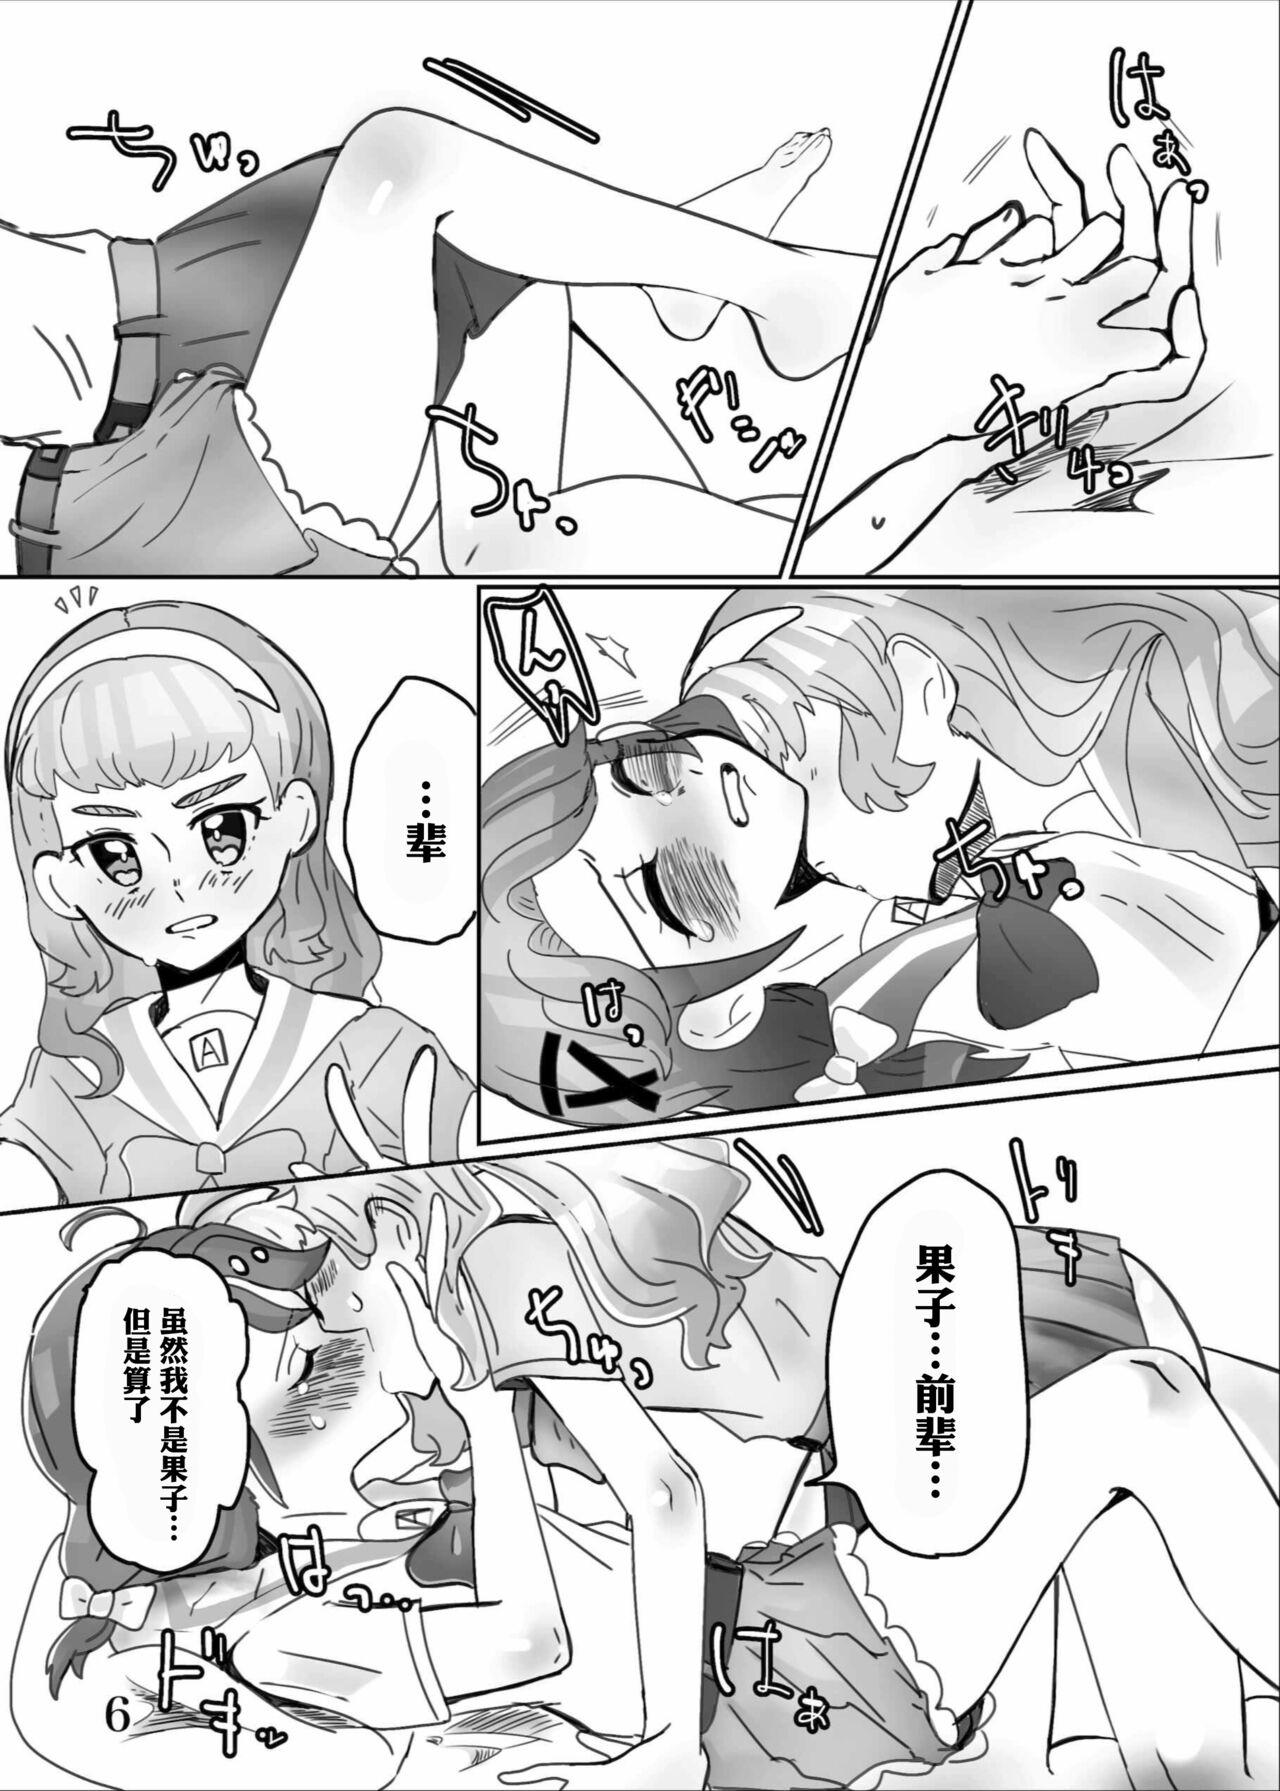 Cocksuckers yaritaigotone do my best - Pretty cure Tropical rouge precure Cock - Page 8